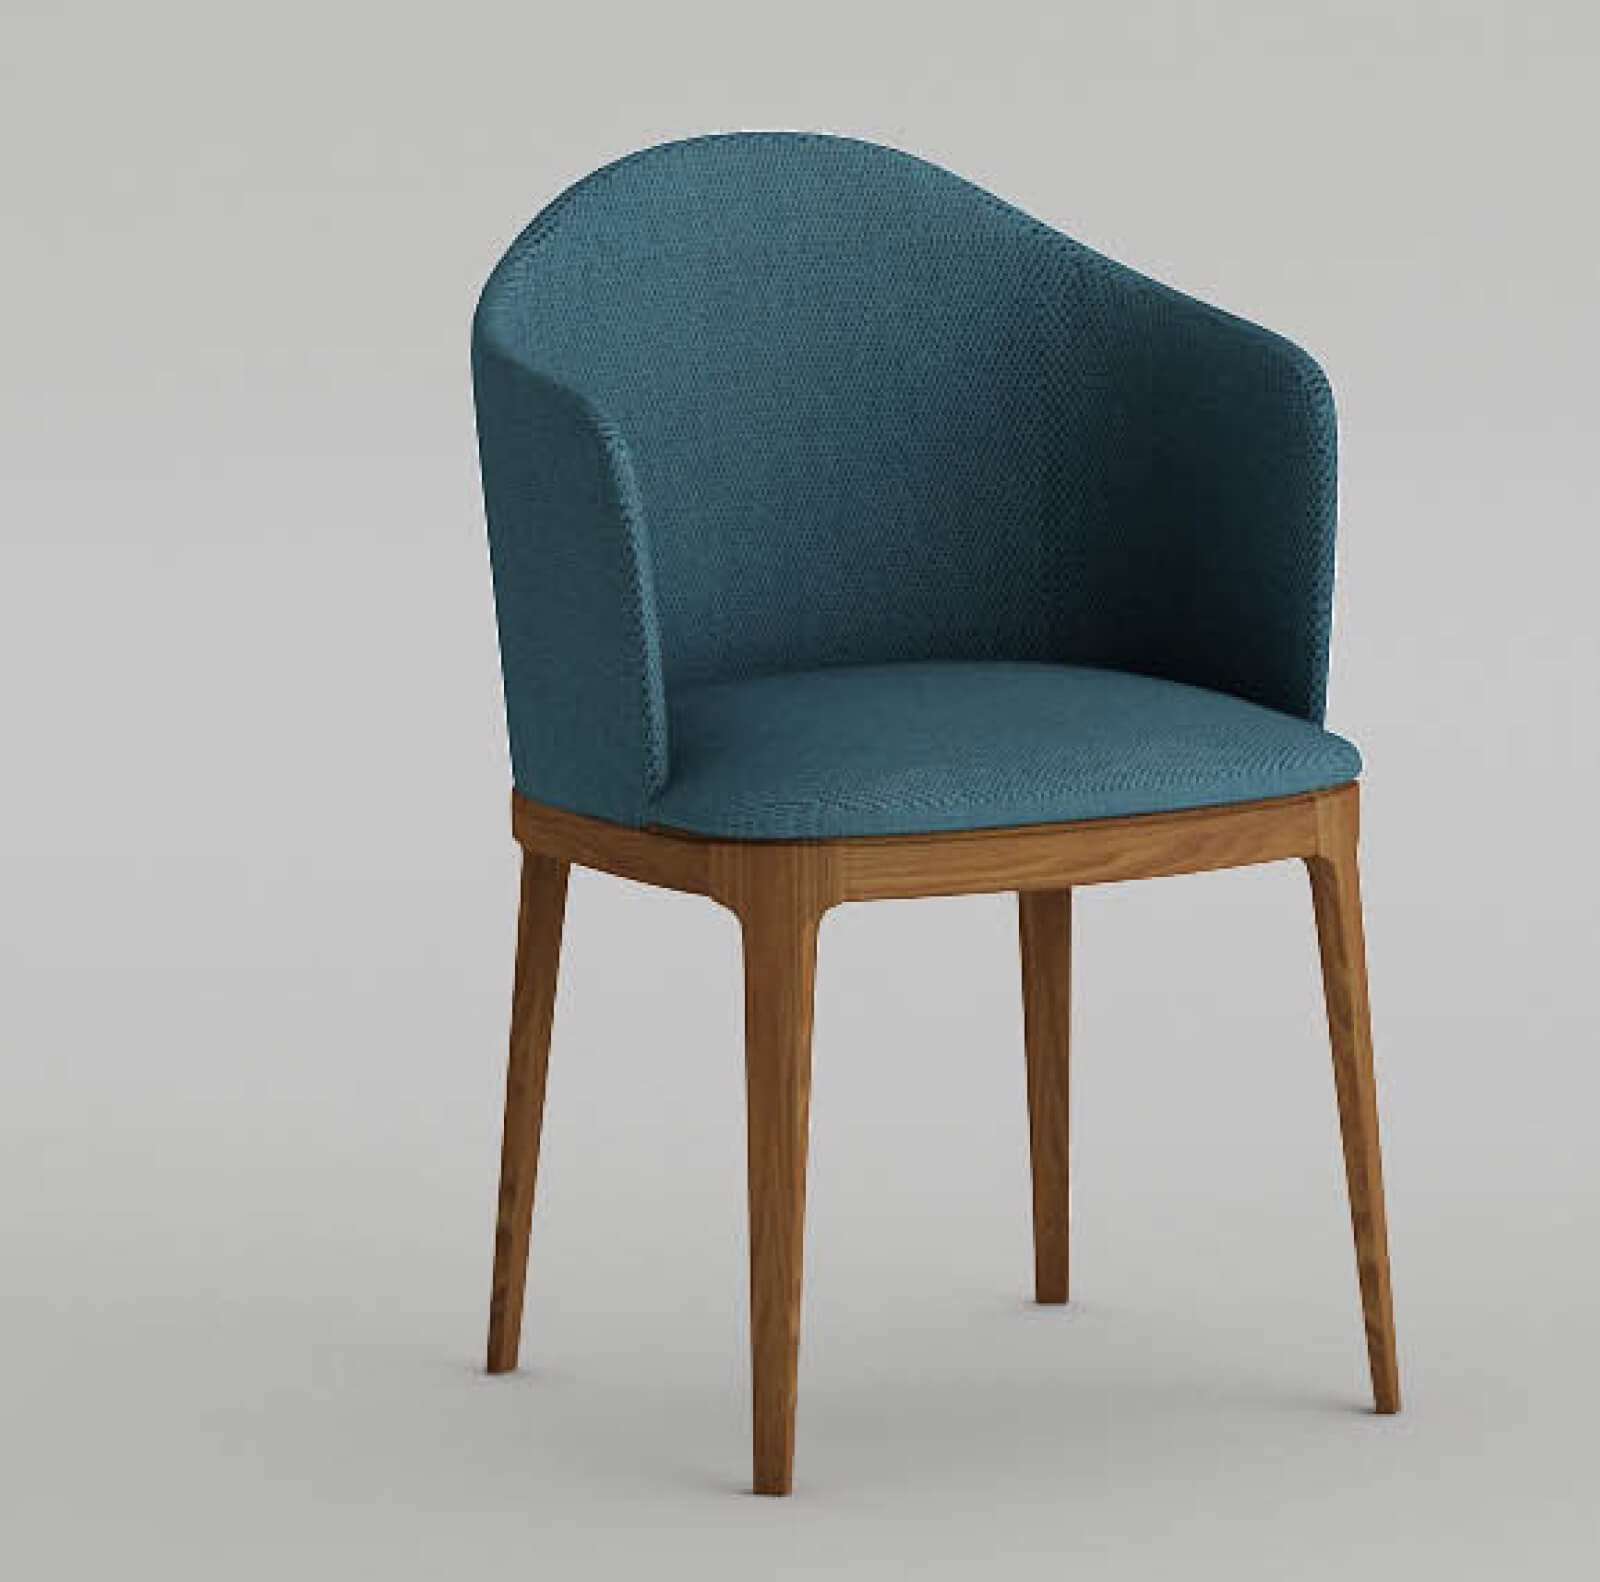 Restaurant dining chair with arms